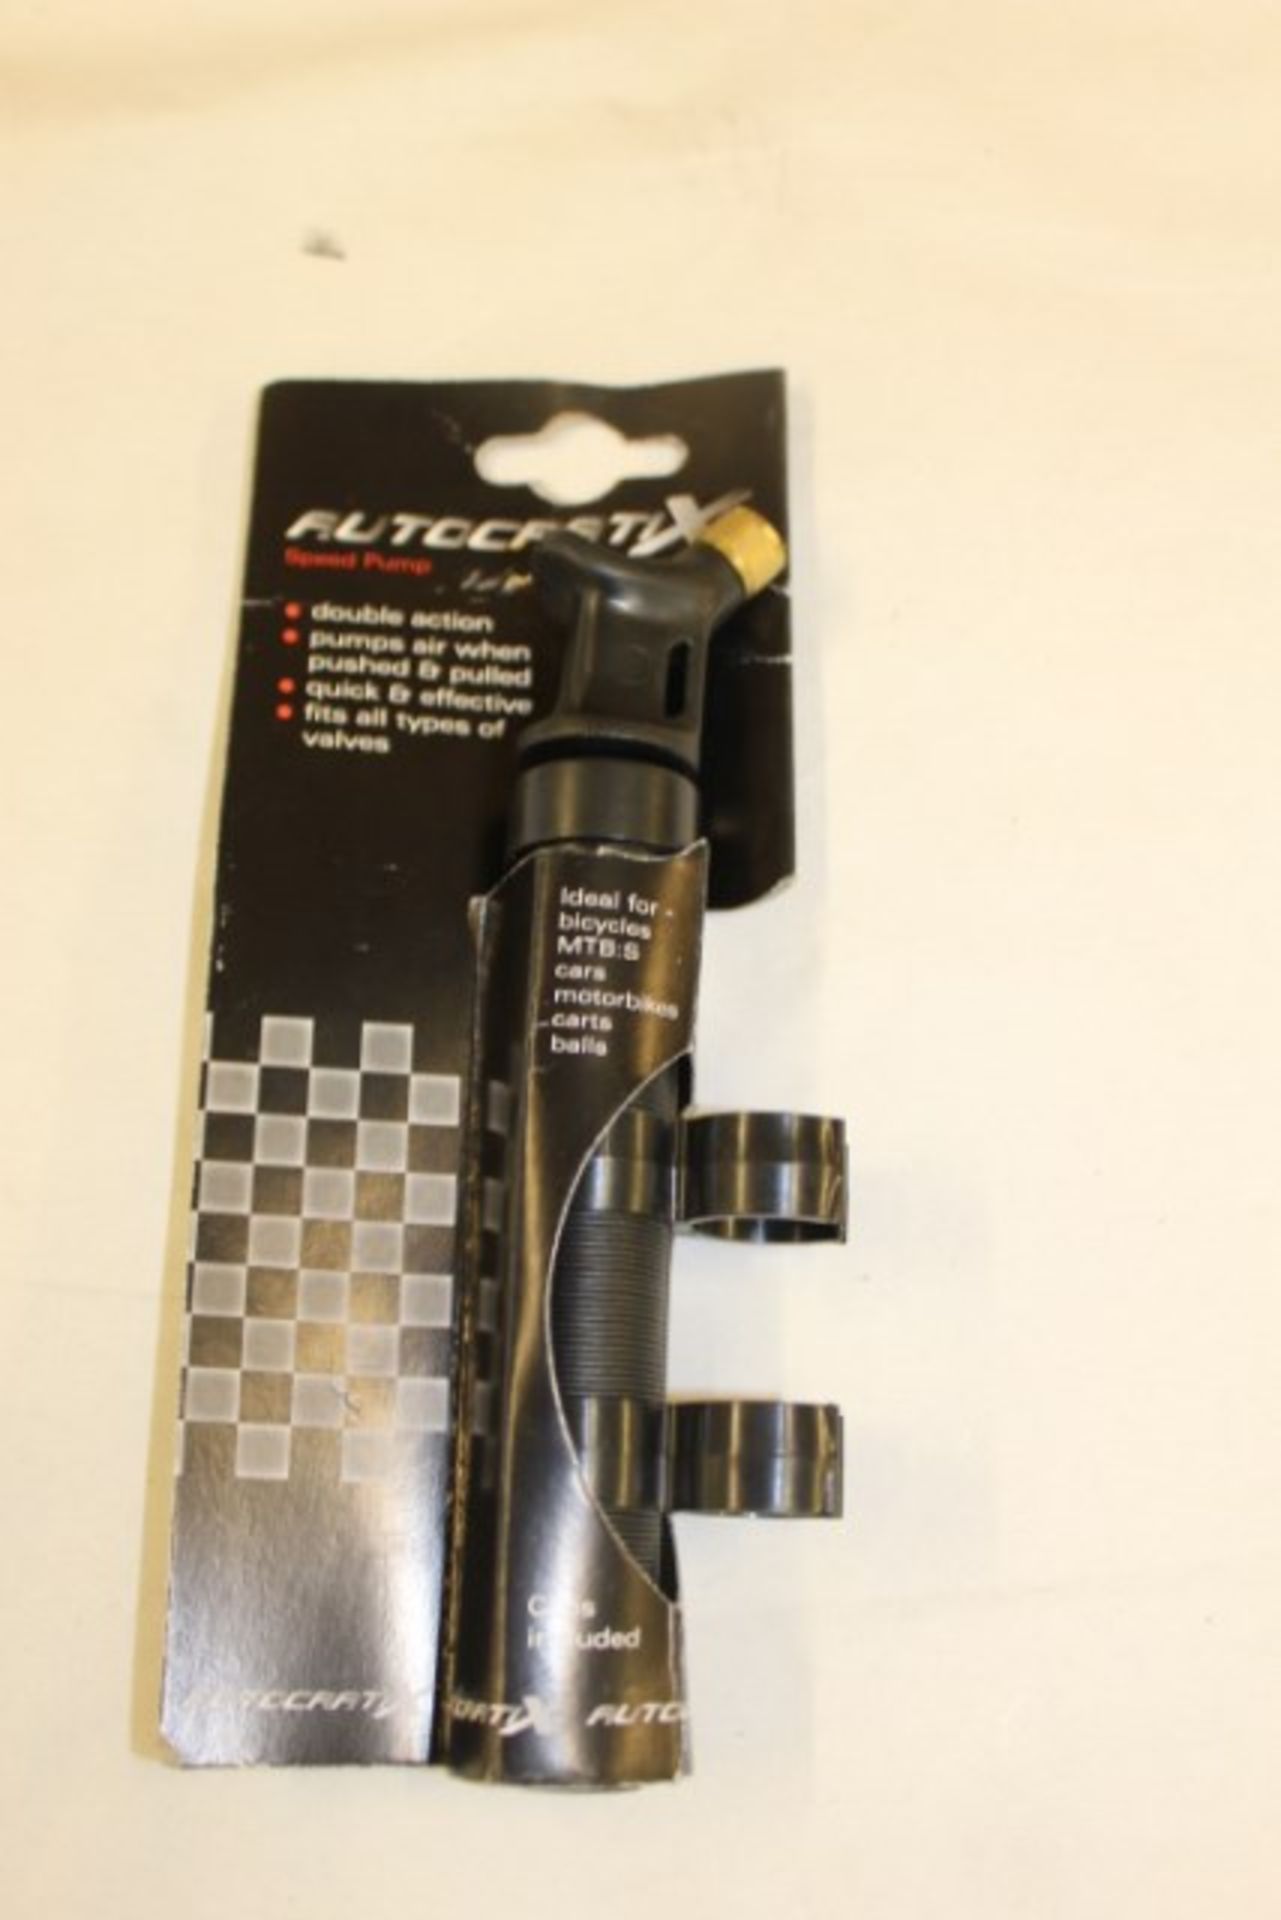 Autocratix Double Action Bicycle Speed Pump X 2 YOUR BID PRICE TO BE MULTIPLIED BY TWO